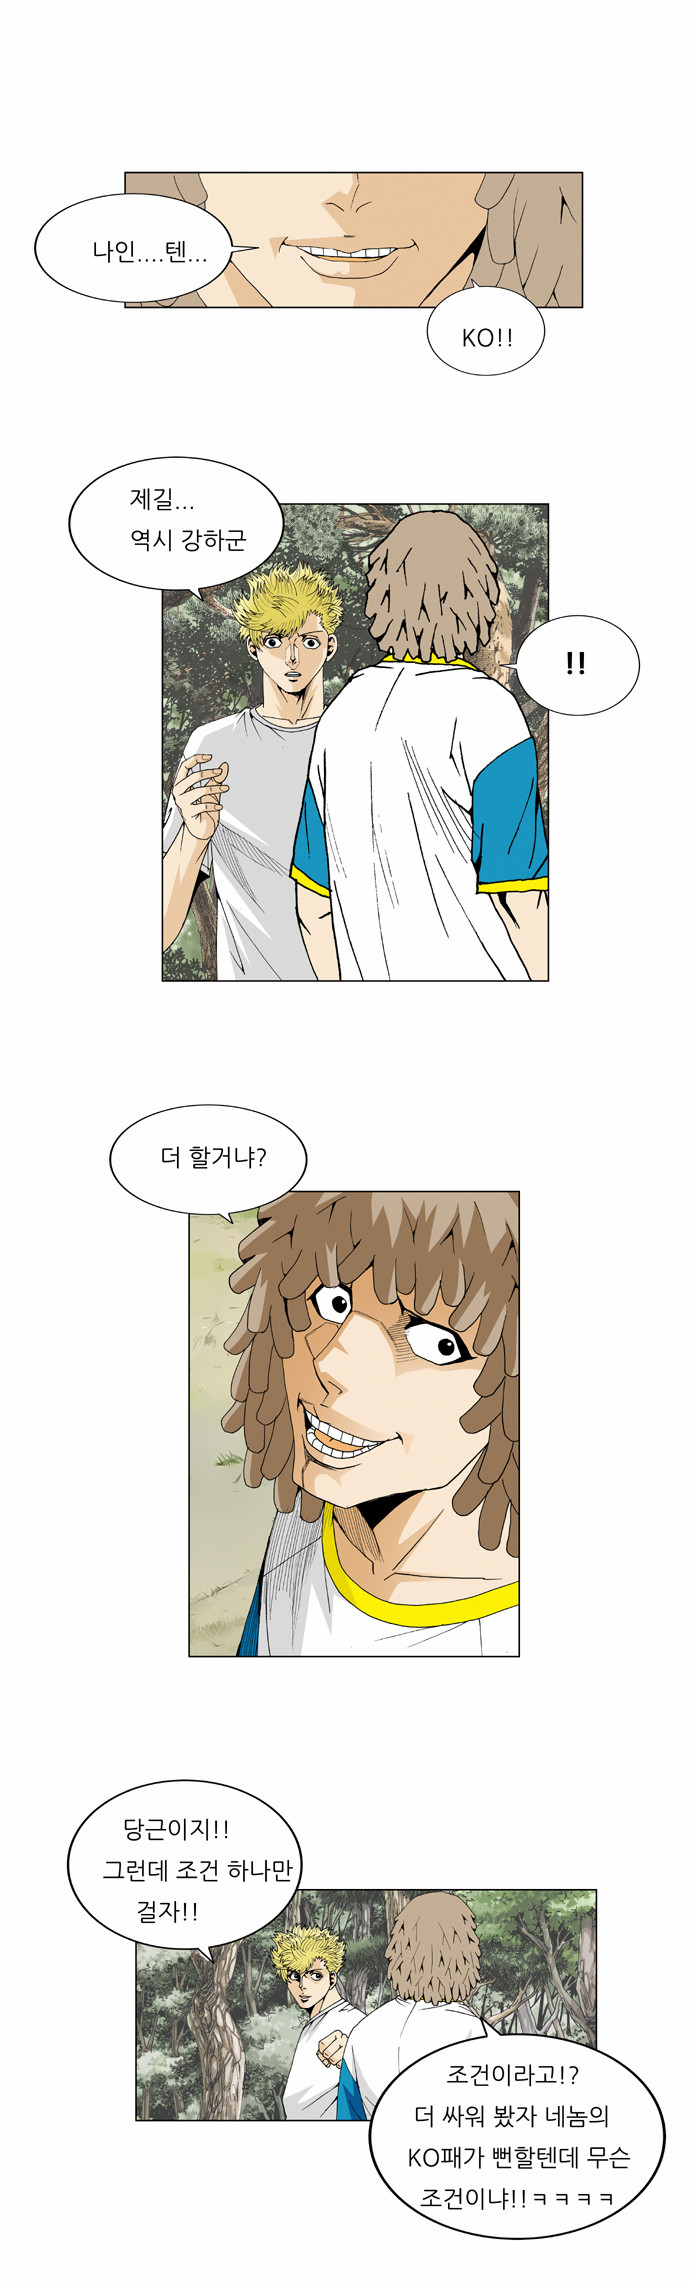 Ultimate Legend - Kang Hae Hyo - Chapter 44 - Page 29